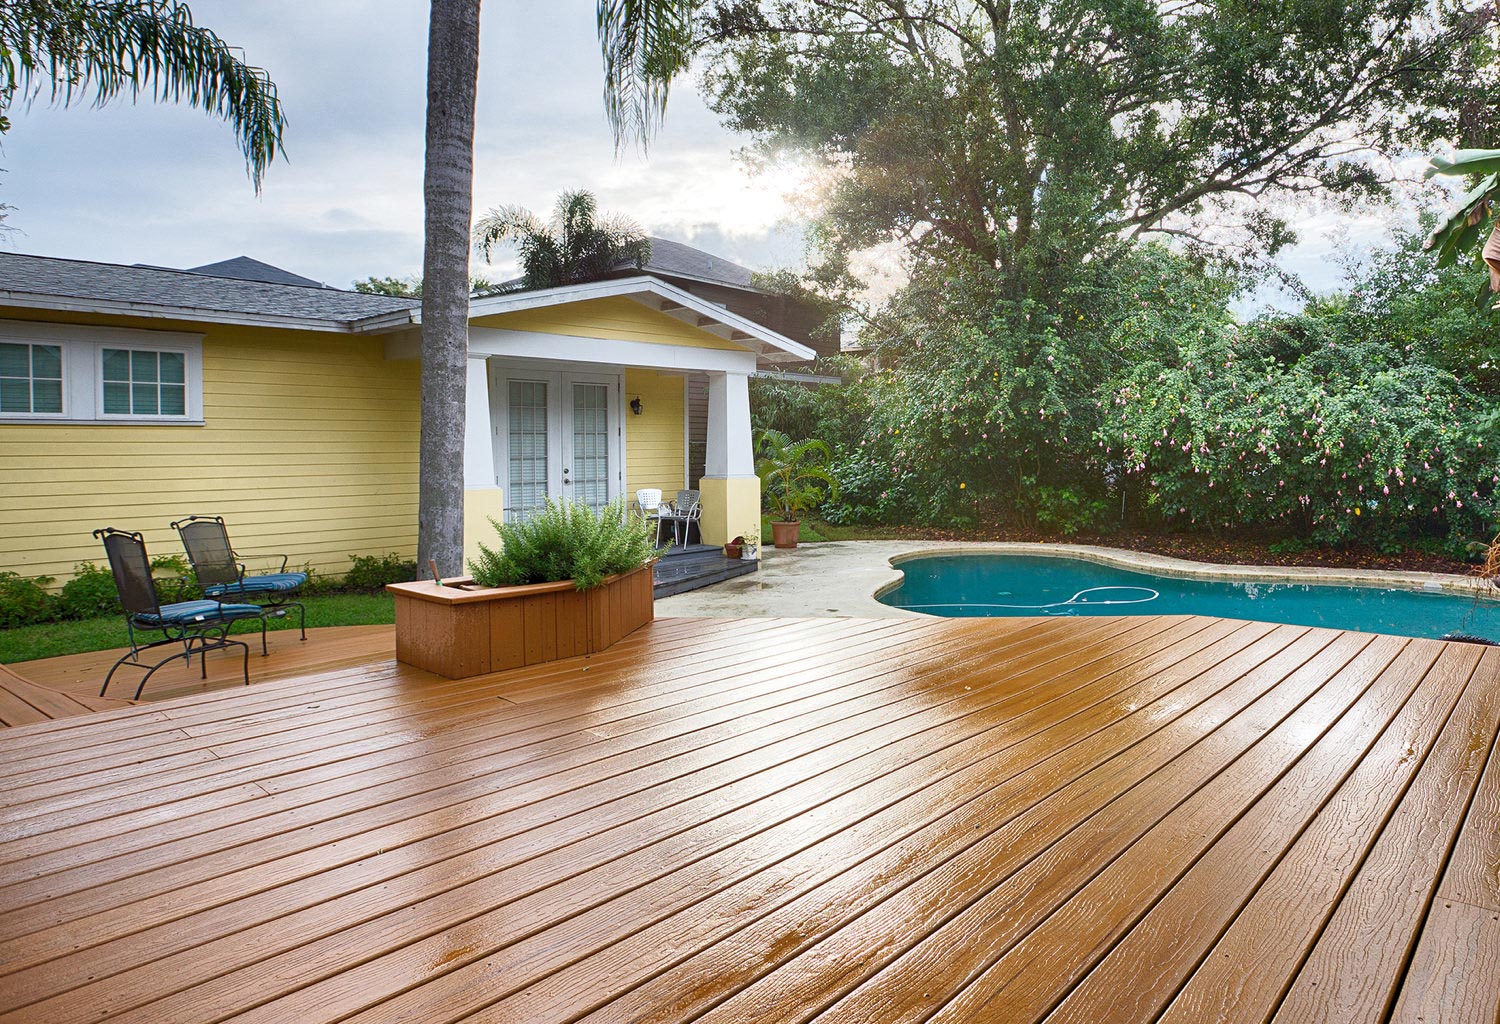 Yellow house with white trim and brown composite pool deck.